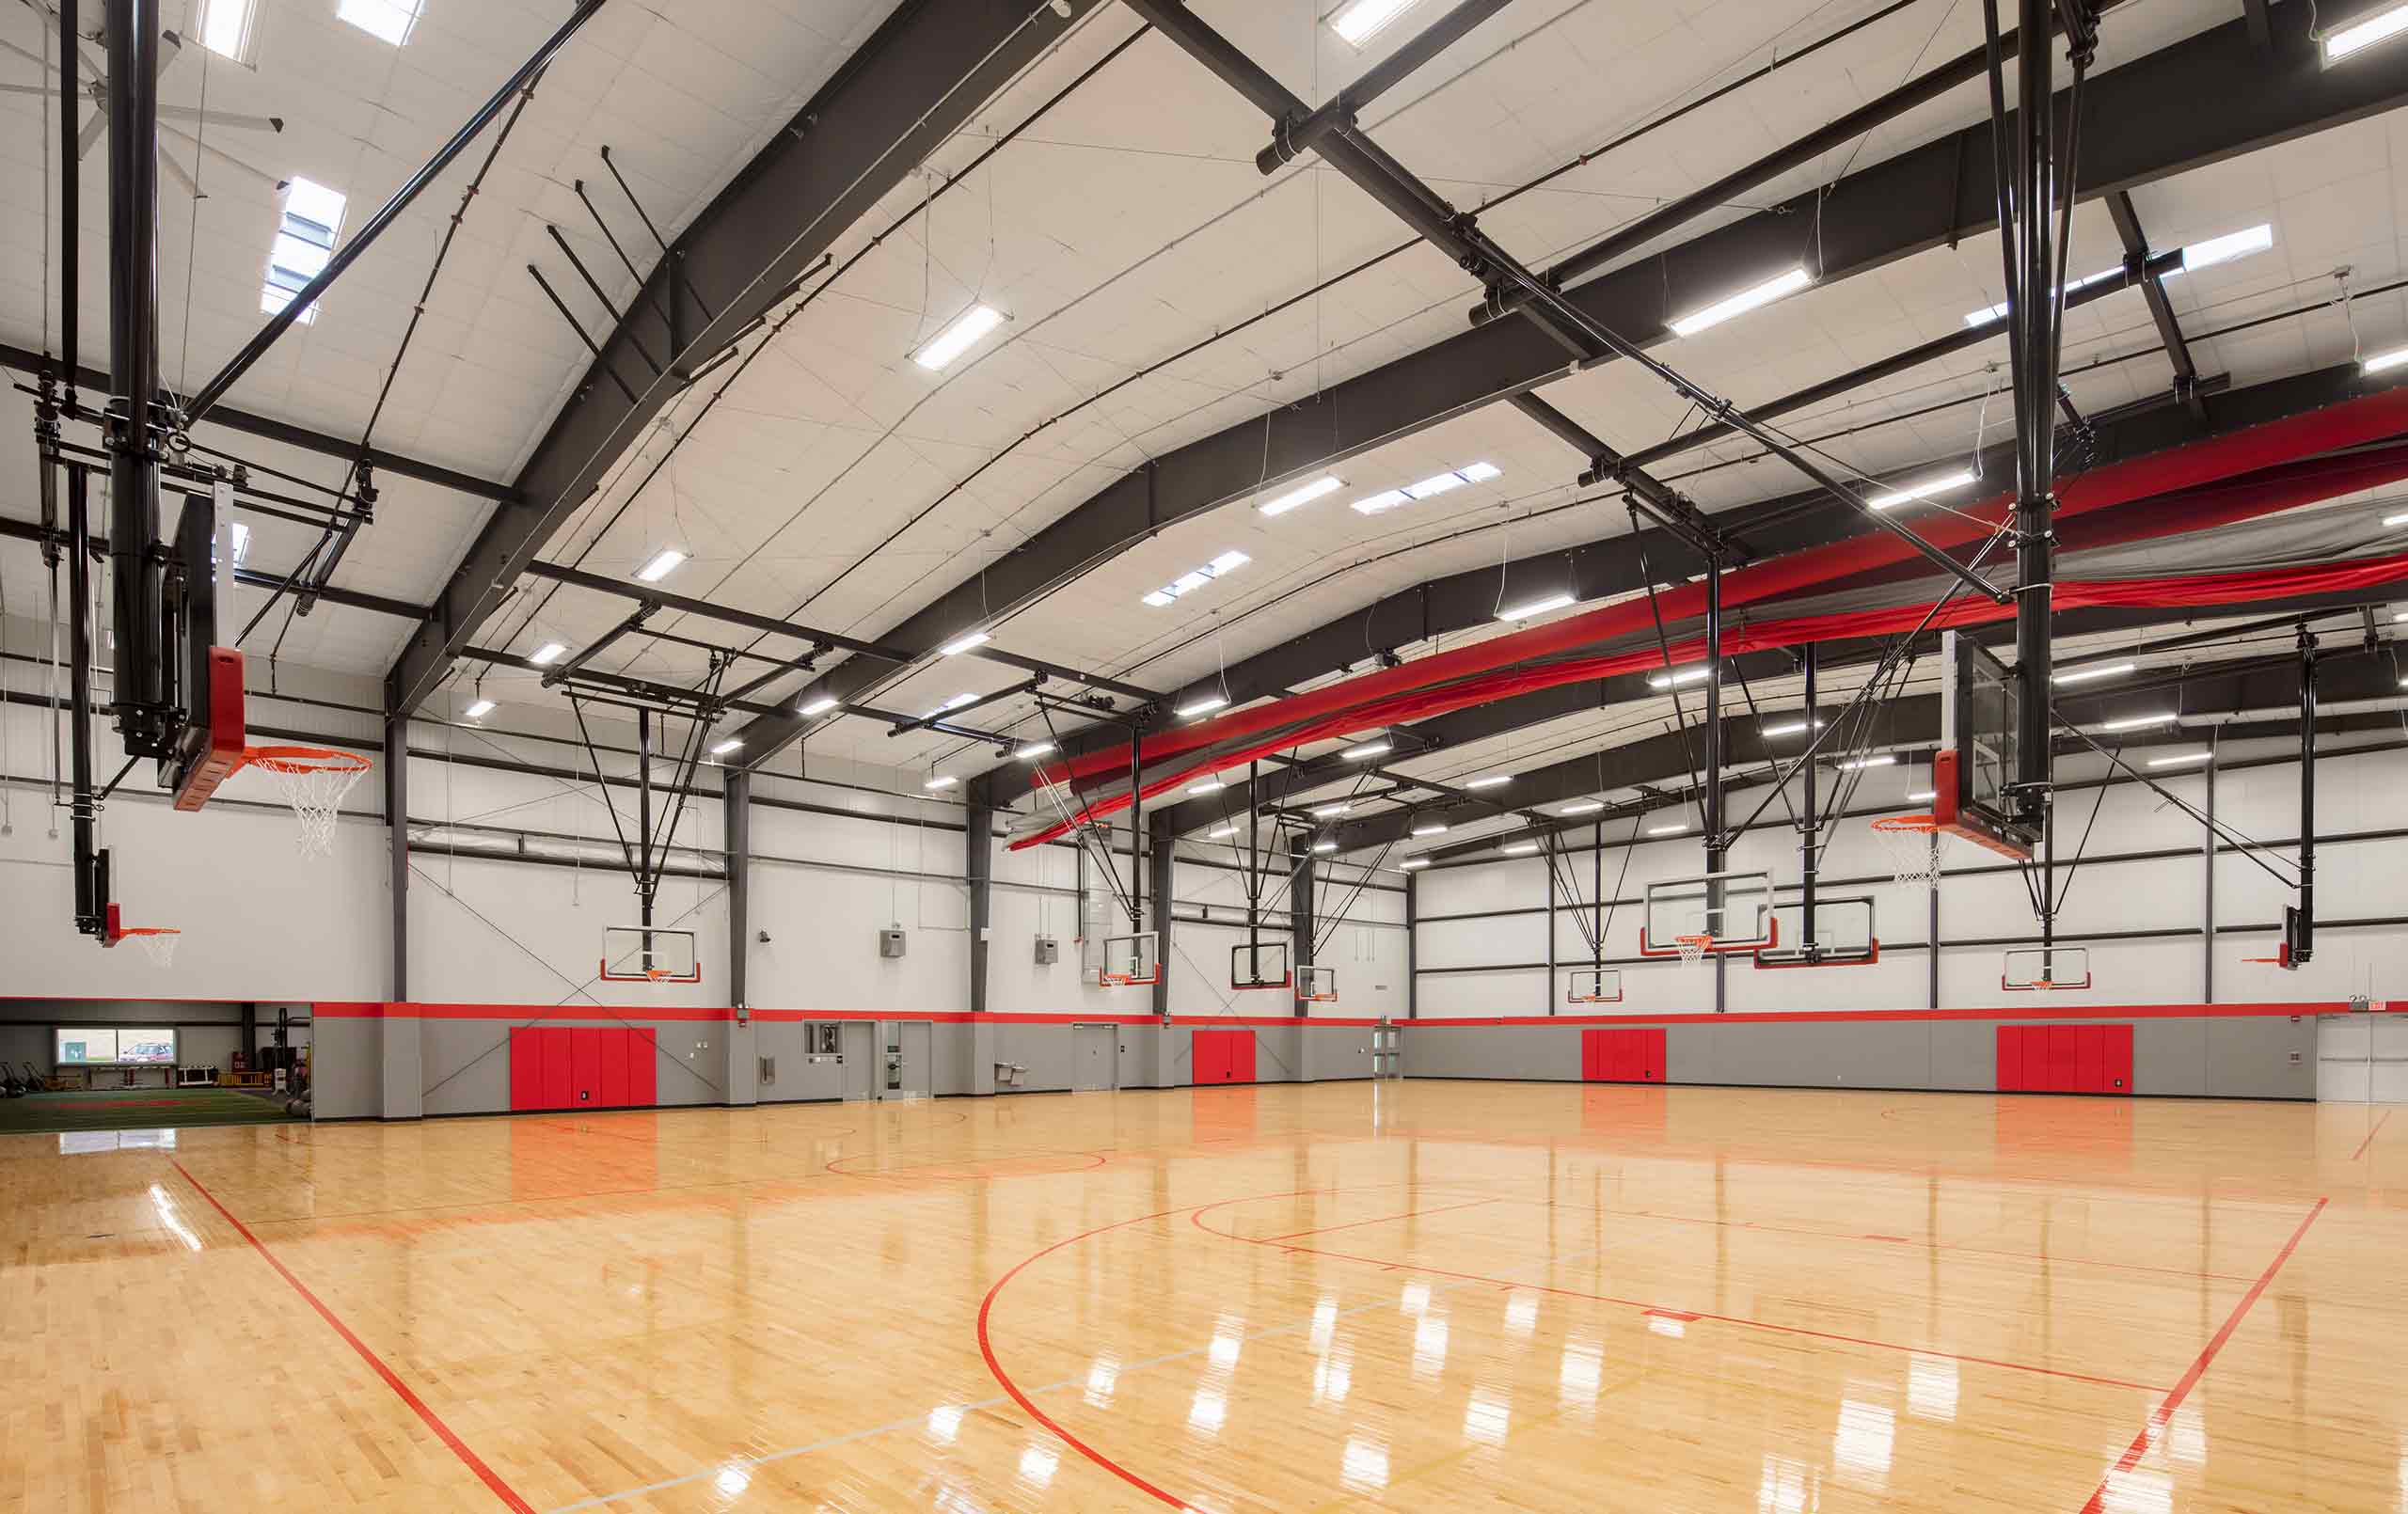 A full view of North Scott High School's indoor basketball court.